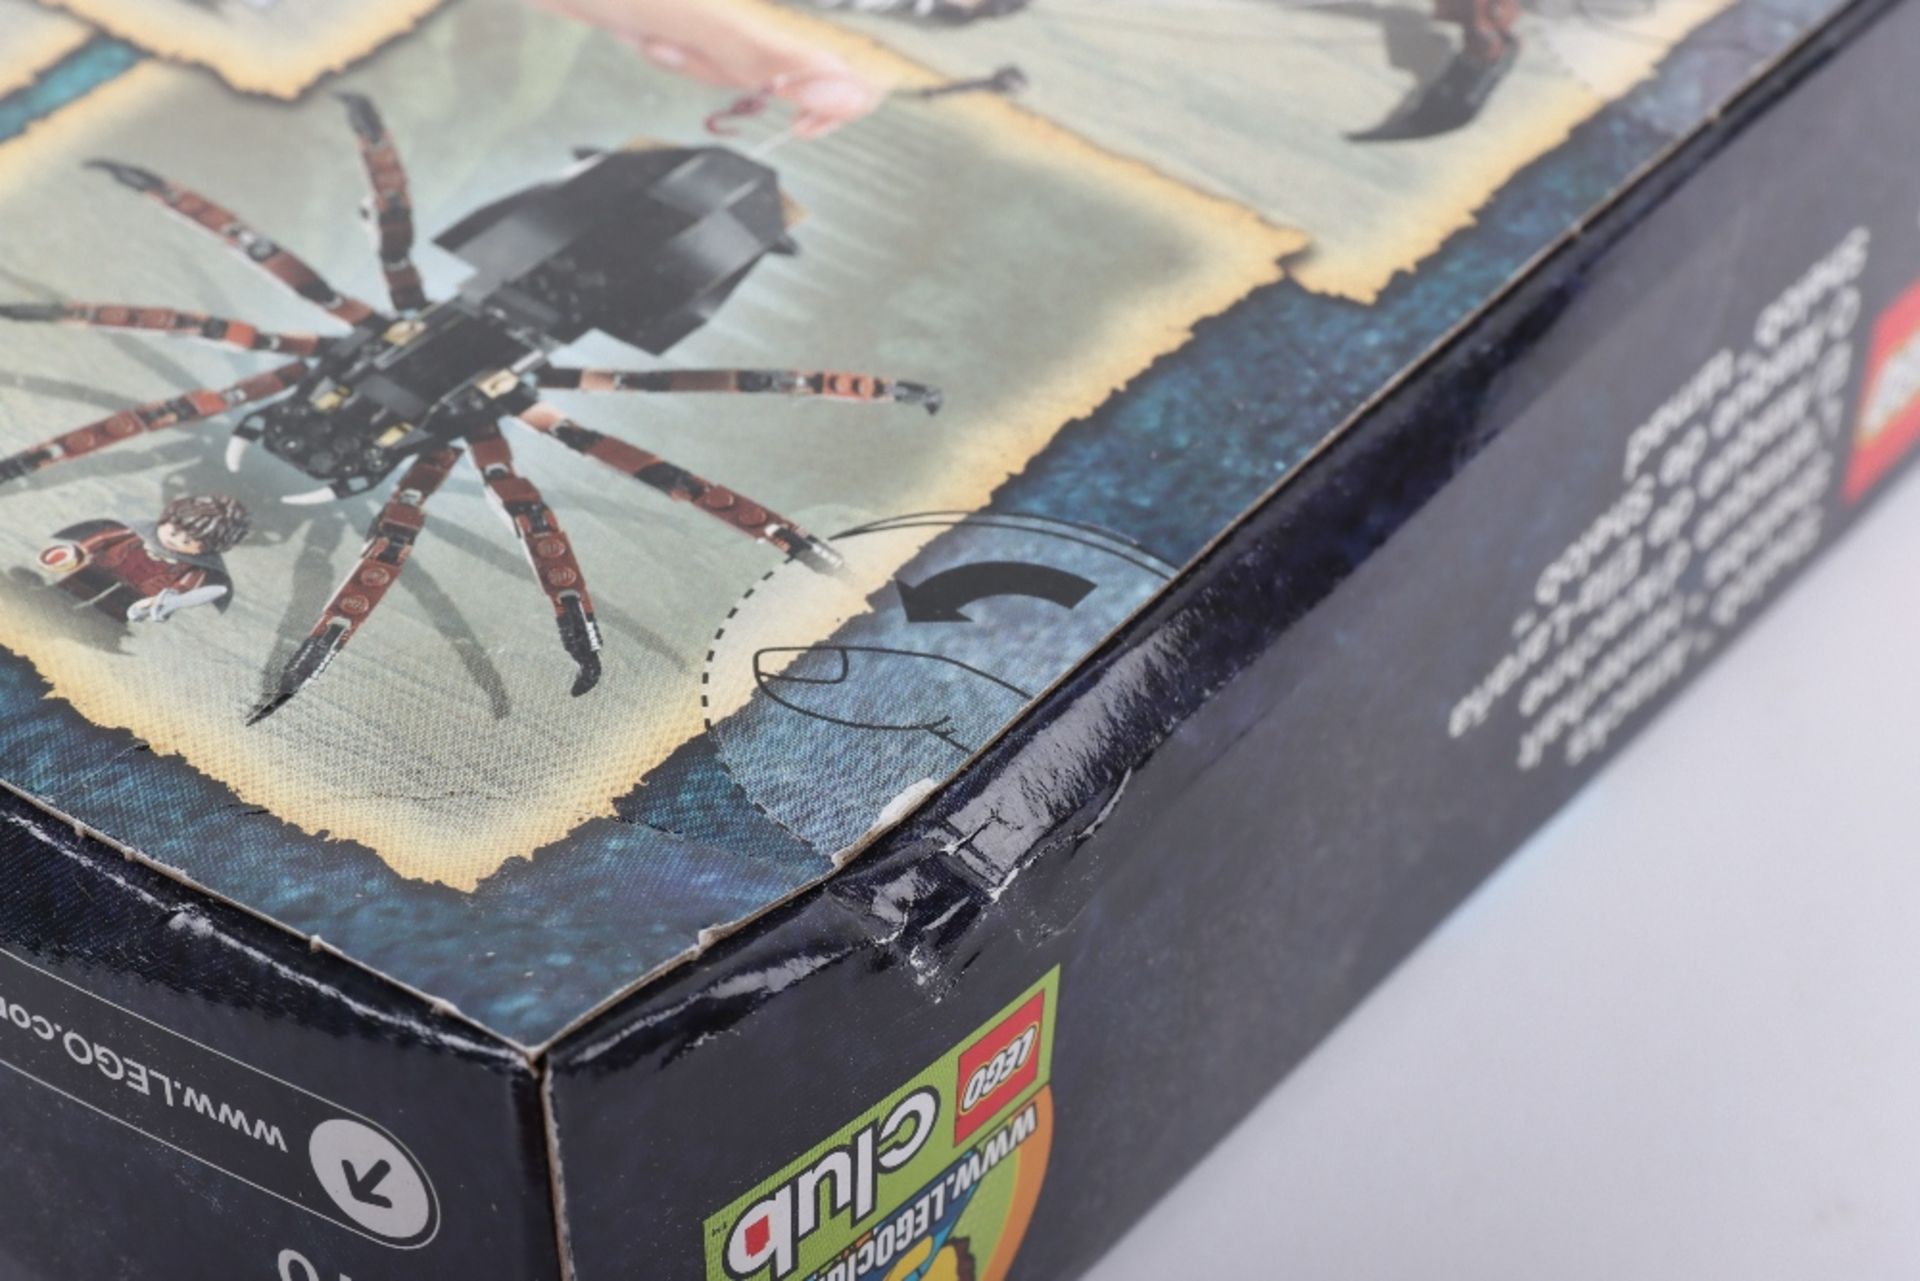 Lego Lord of the rings 9470 shelob attacks sealed boxed - Image 4 of 7